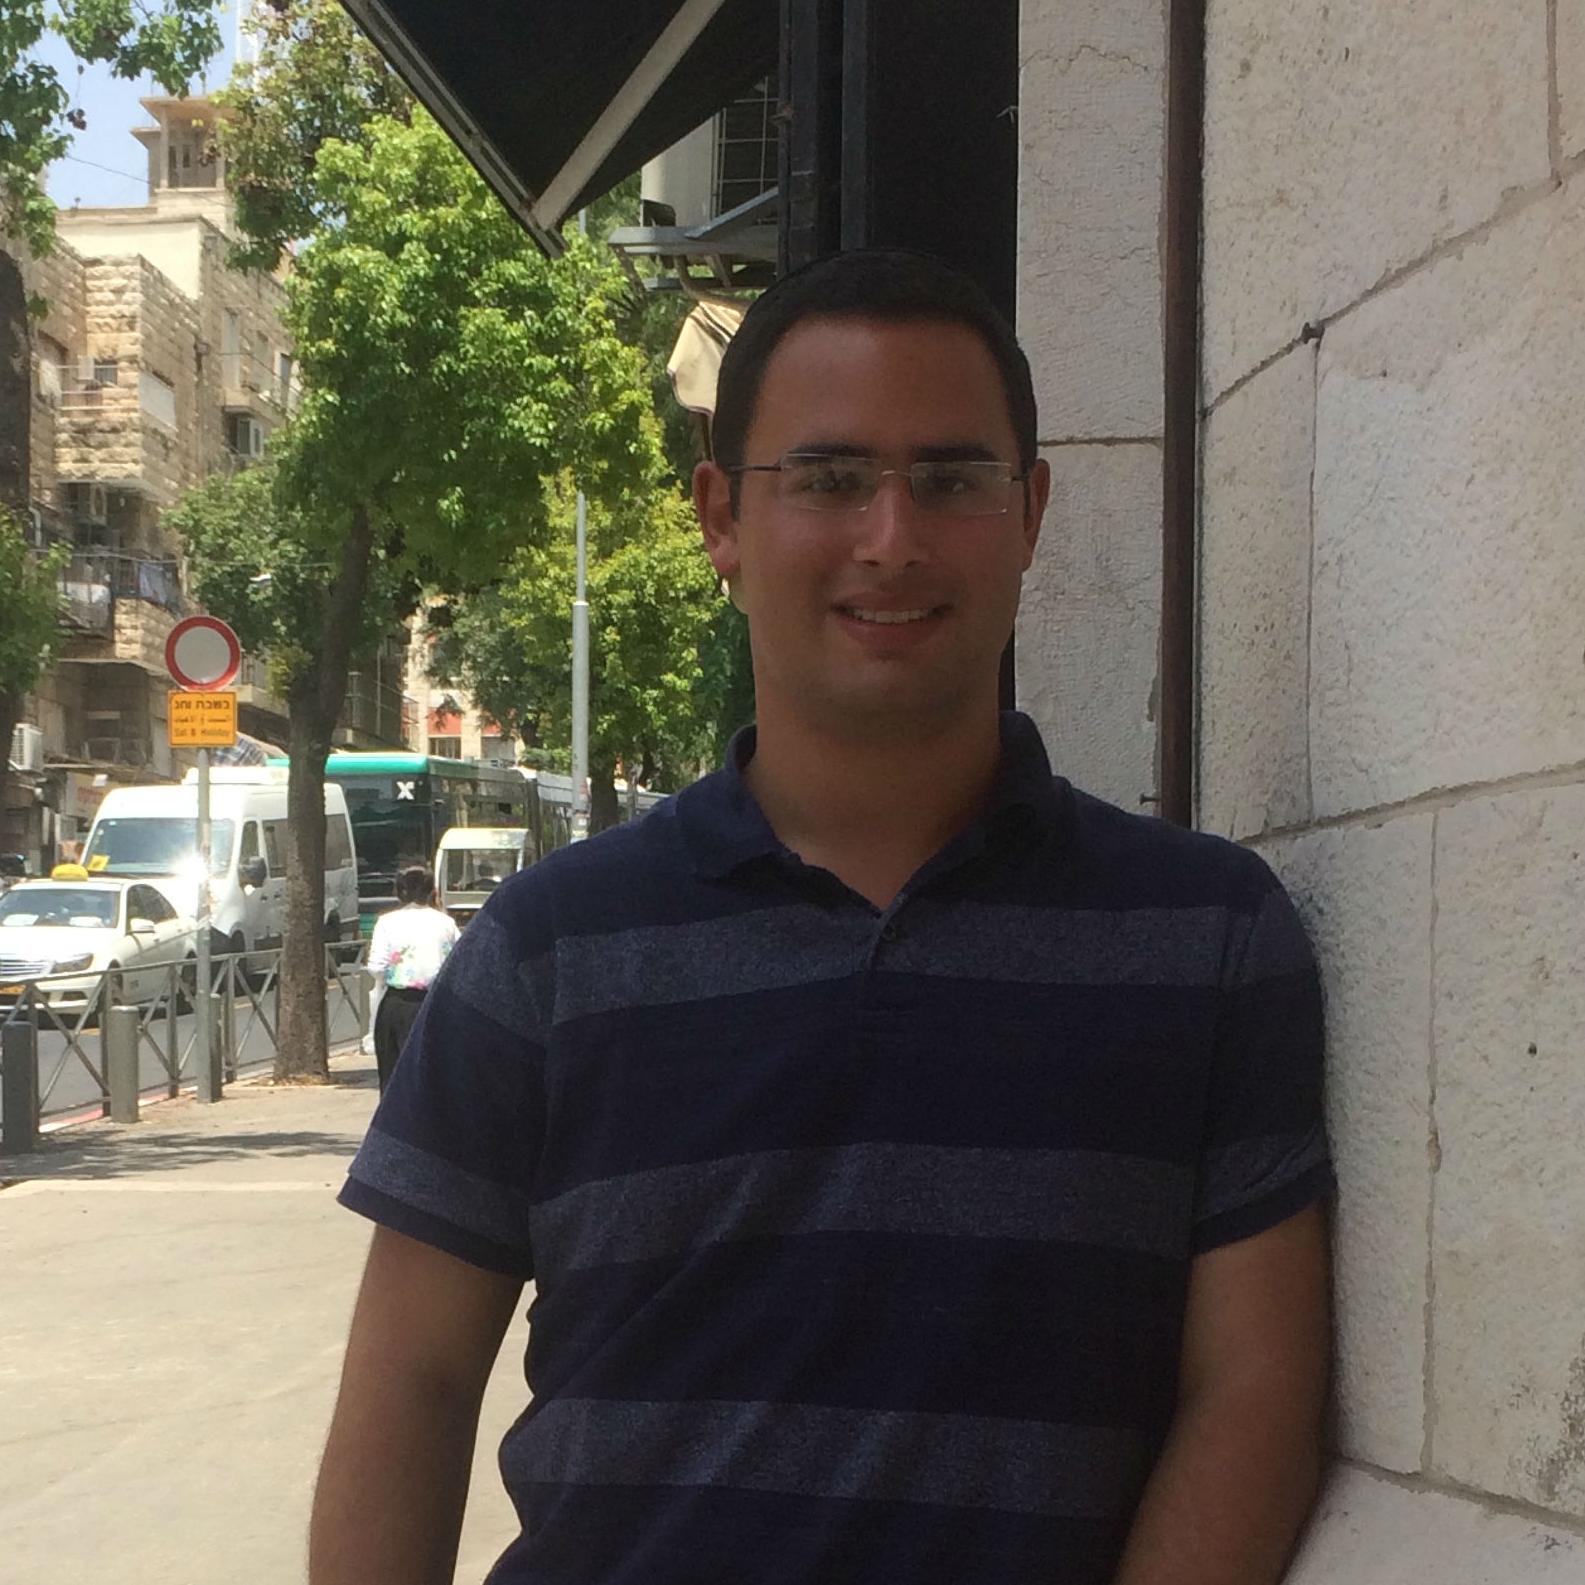 Raphael Gal standing at the entrance of software development company Tobeweb, in Jerusalem, where he interned this summer